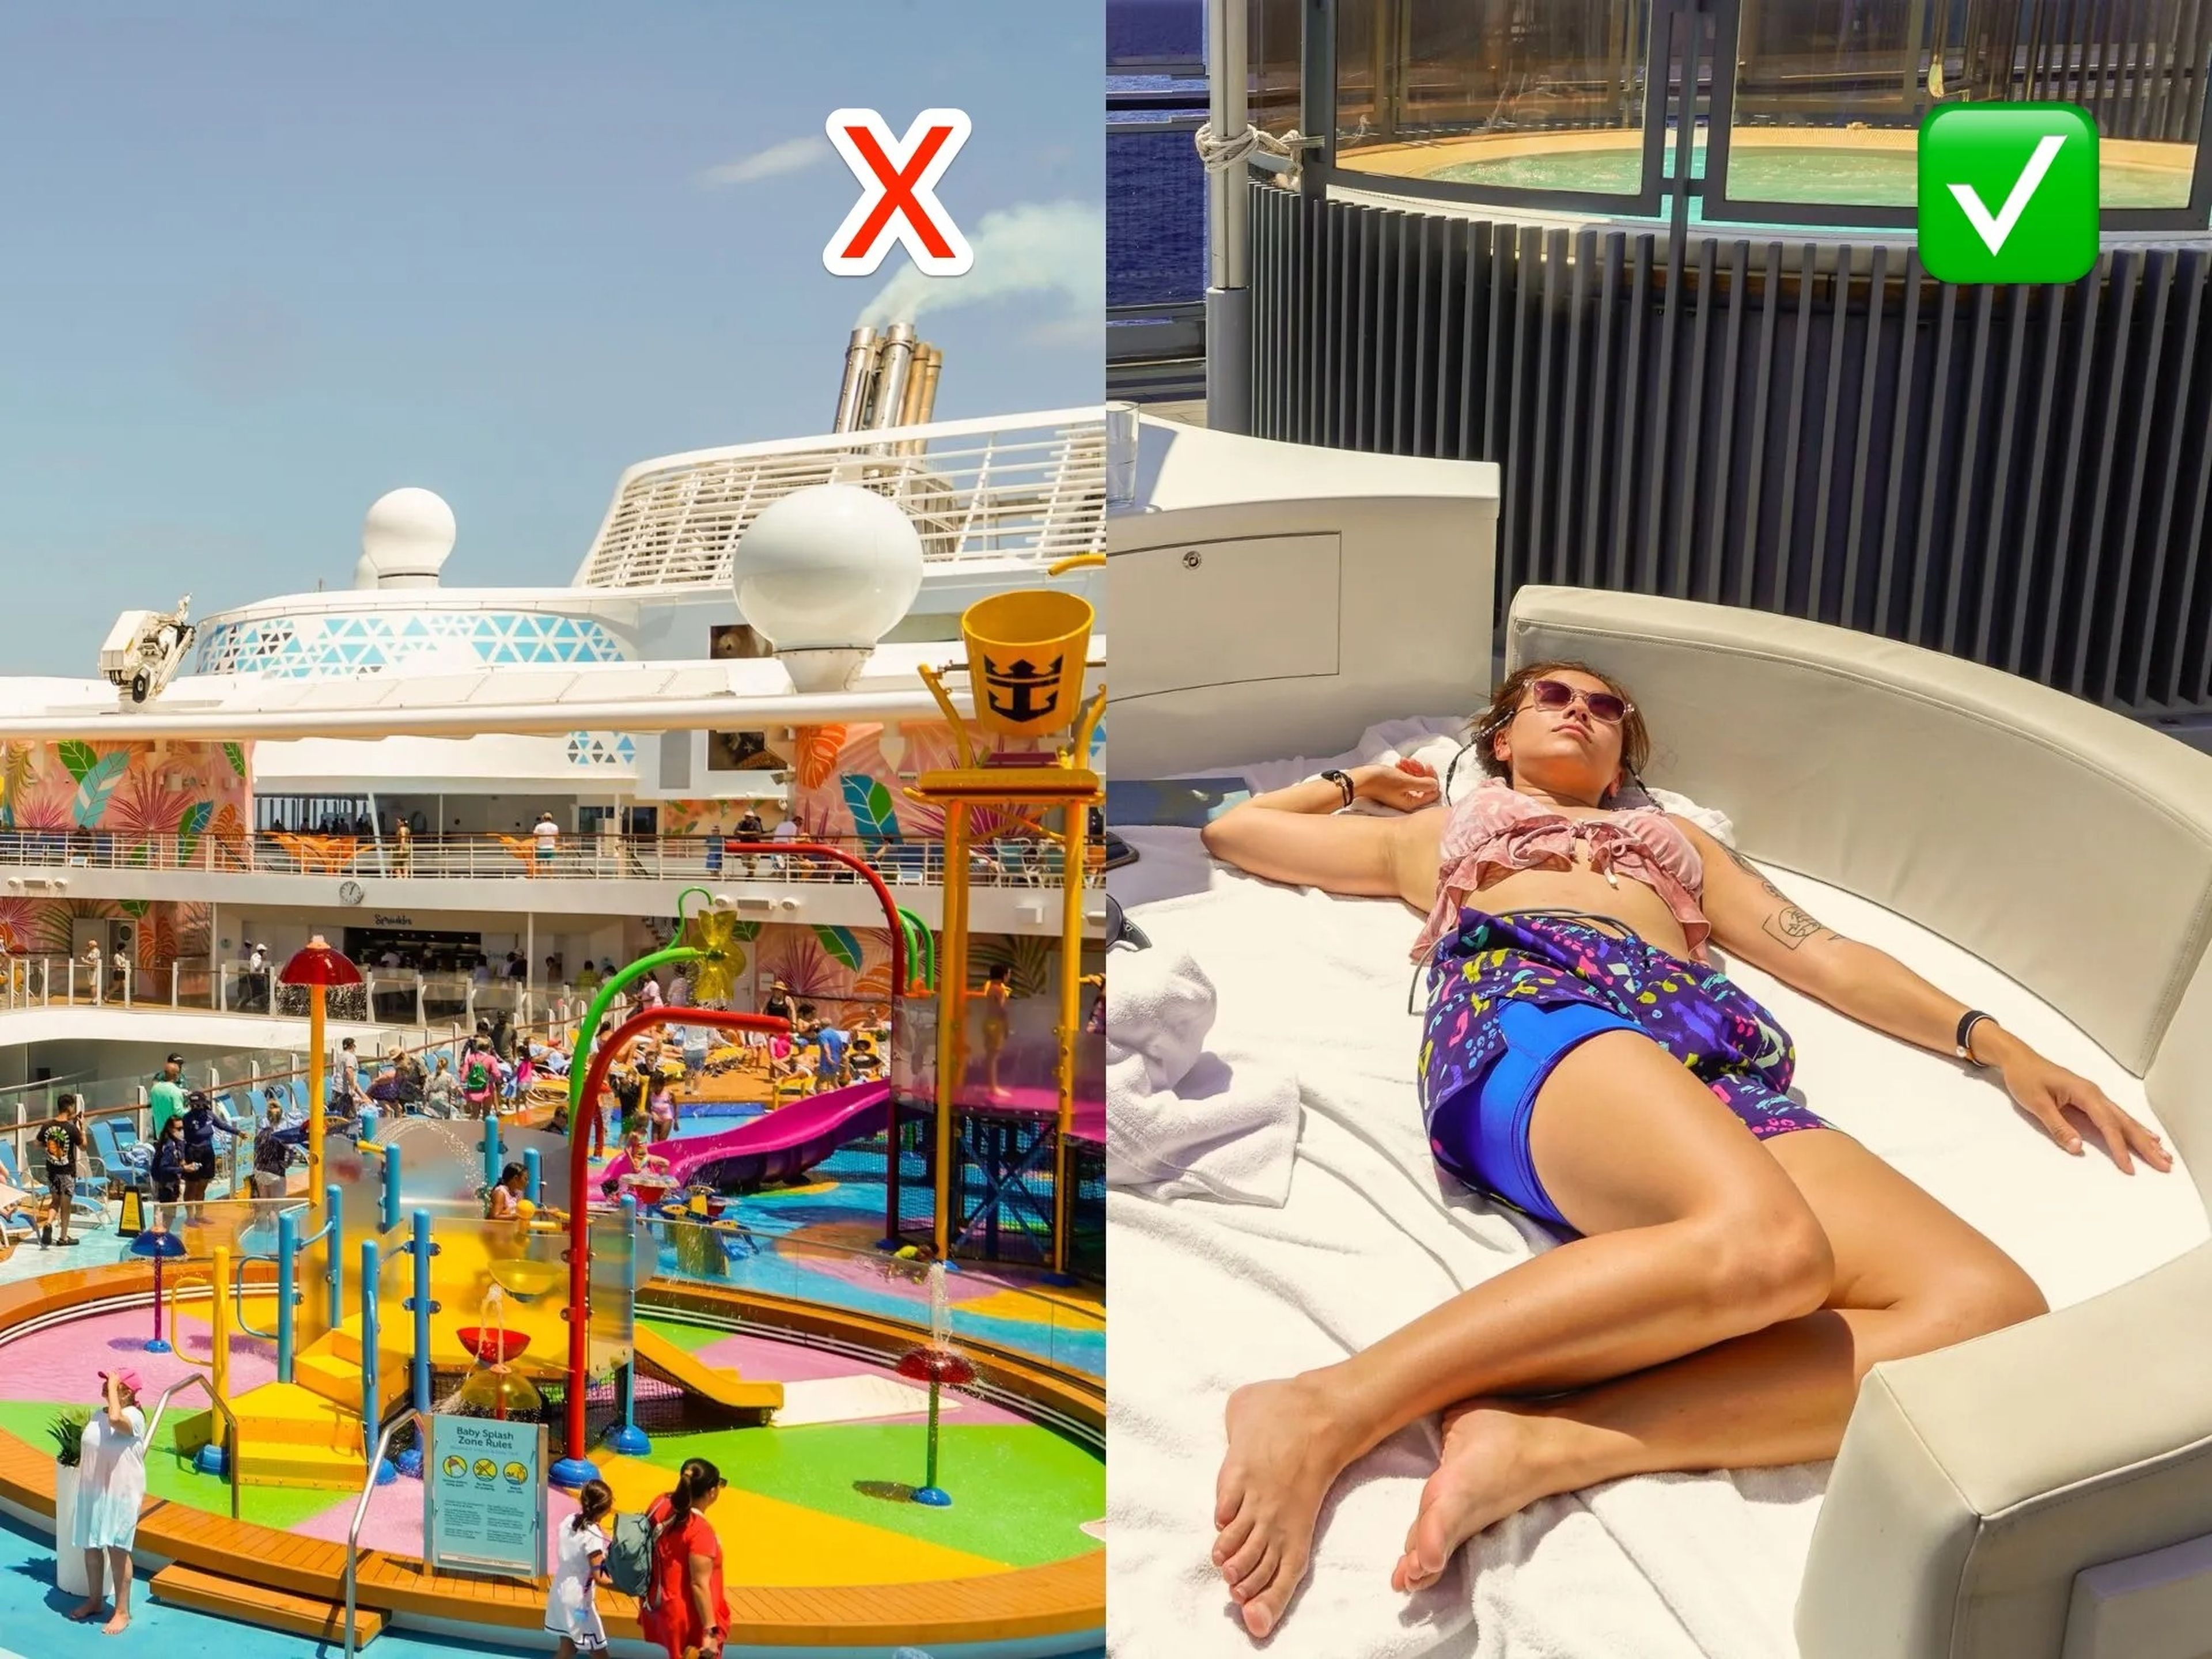 Left: A colorful waterpark on a cruise ship Right: The author lays on a white sunbed on a cruise ship with a circular hot tub behind her.